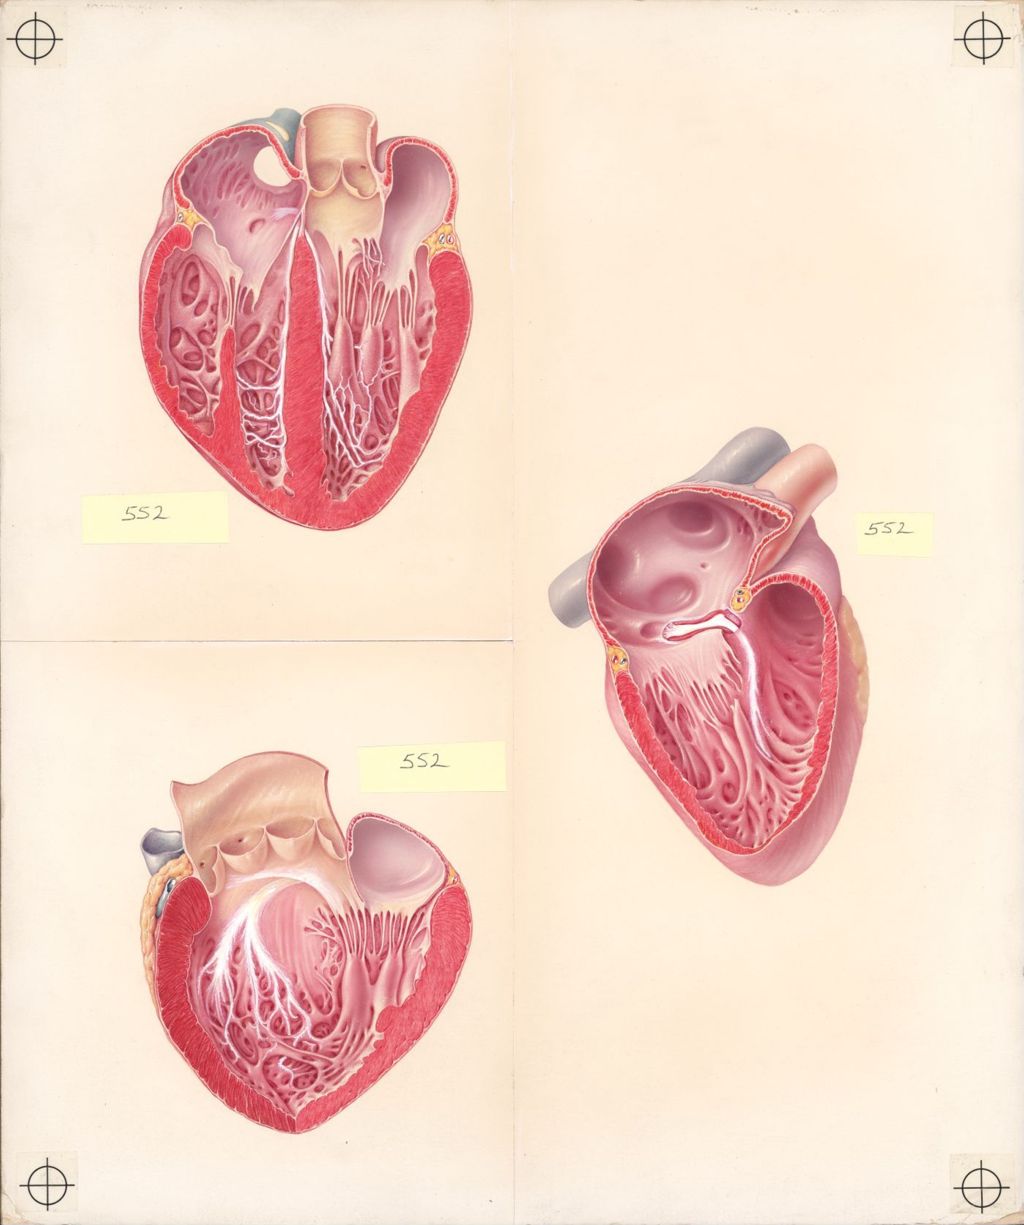 Miniature of Explanatory Atlas, the Autonomic Innervation of the Heart, Plate II, The Conduction System of the Heart